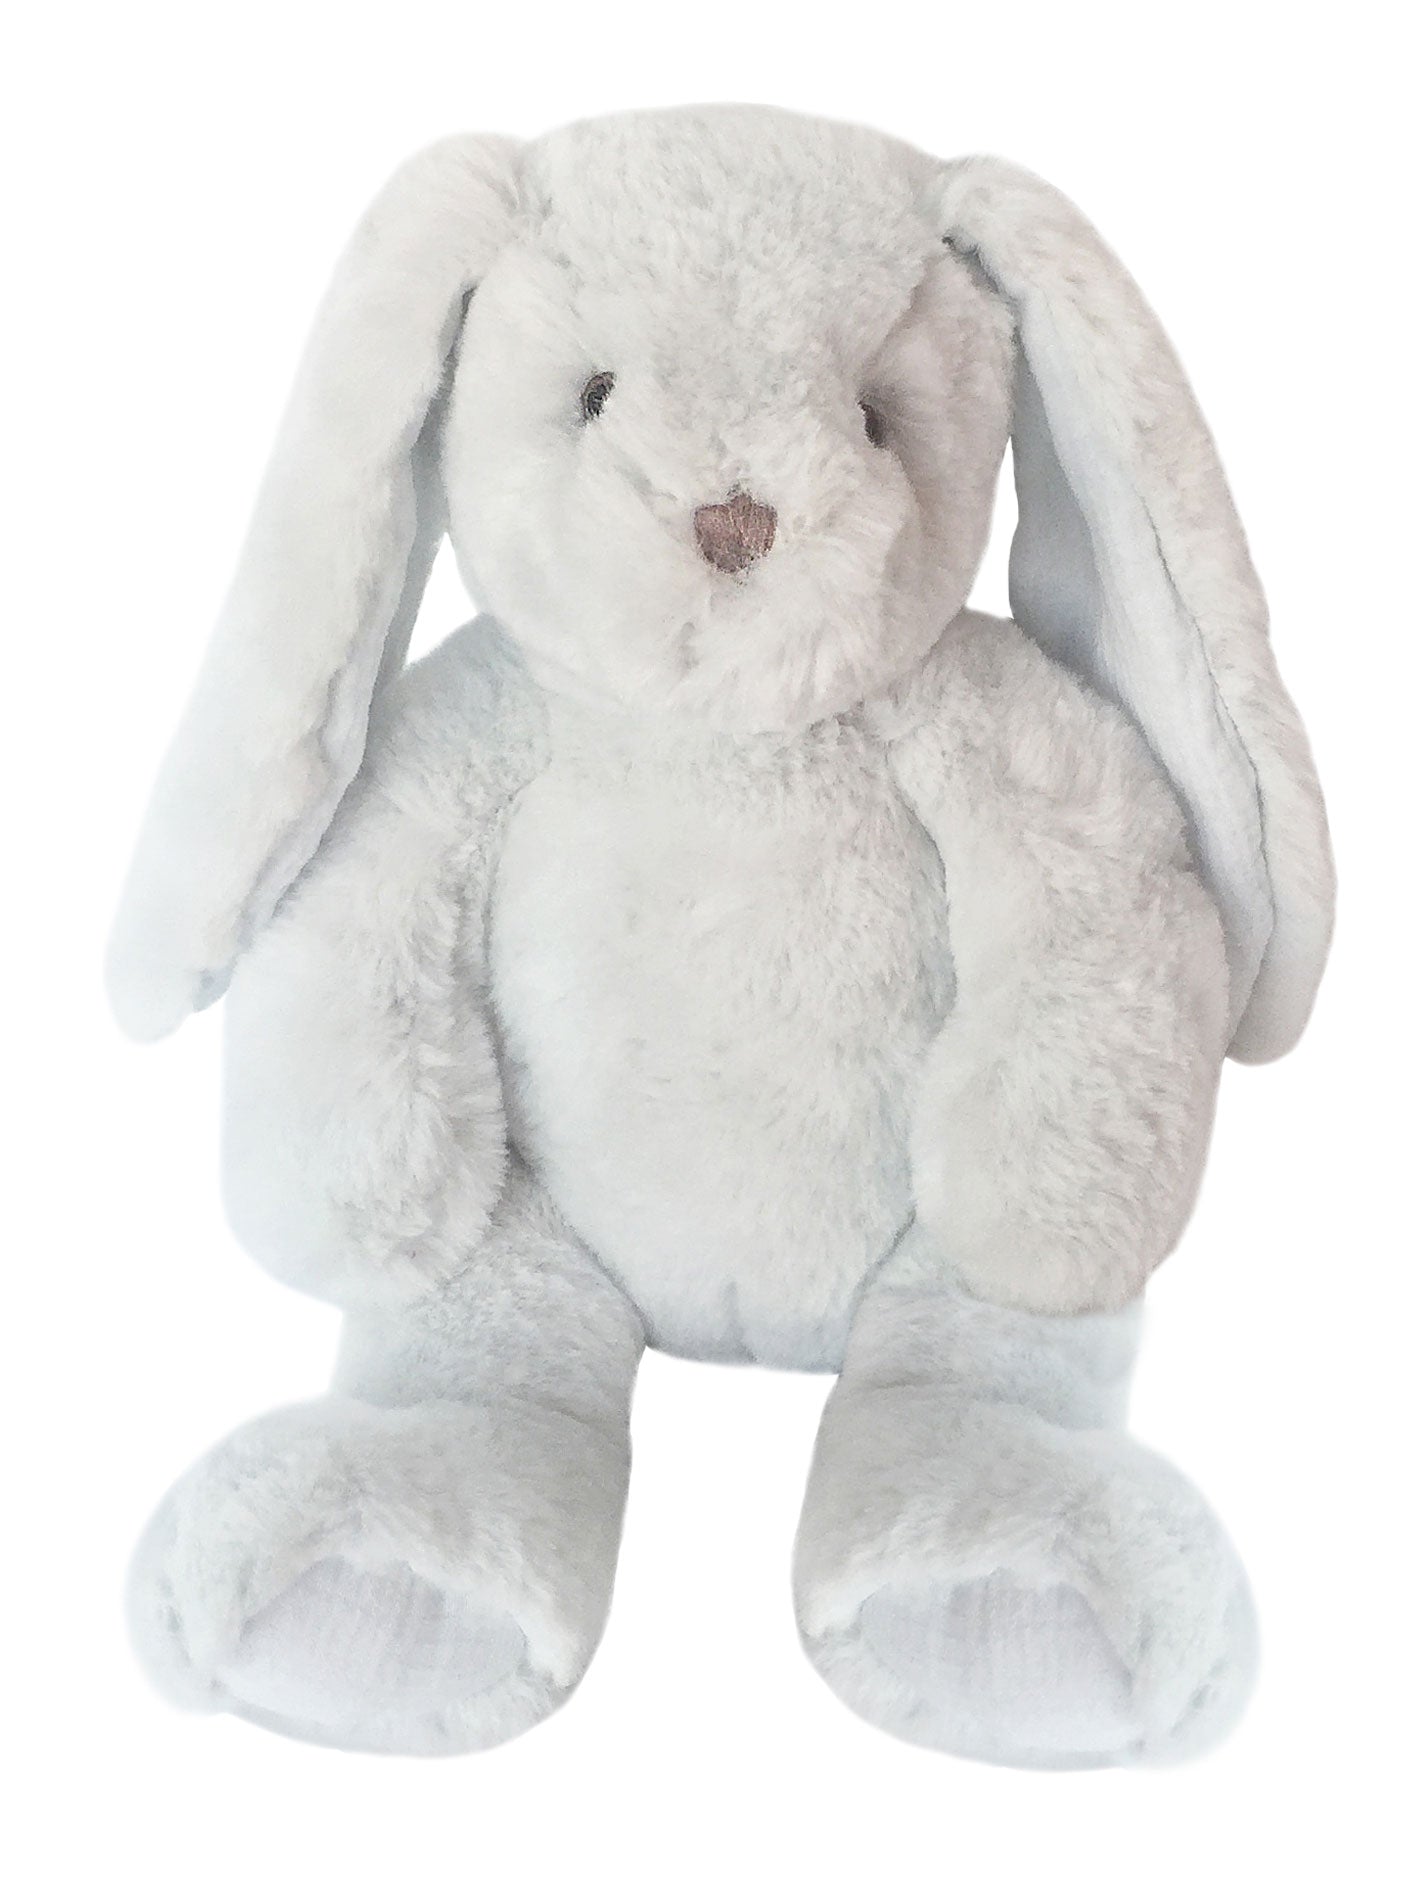 Abbot Blue Bunny, 15 Inches